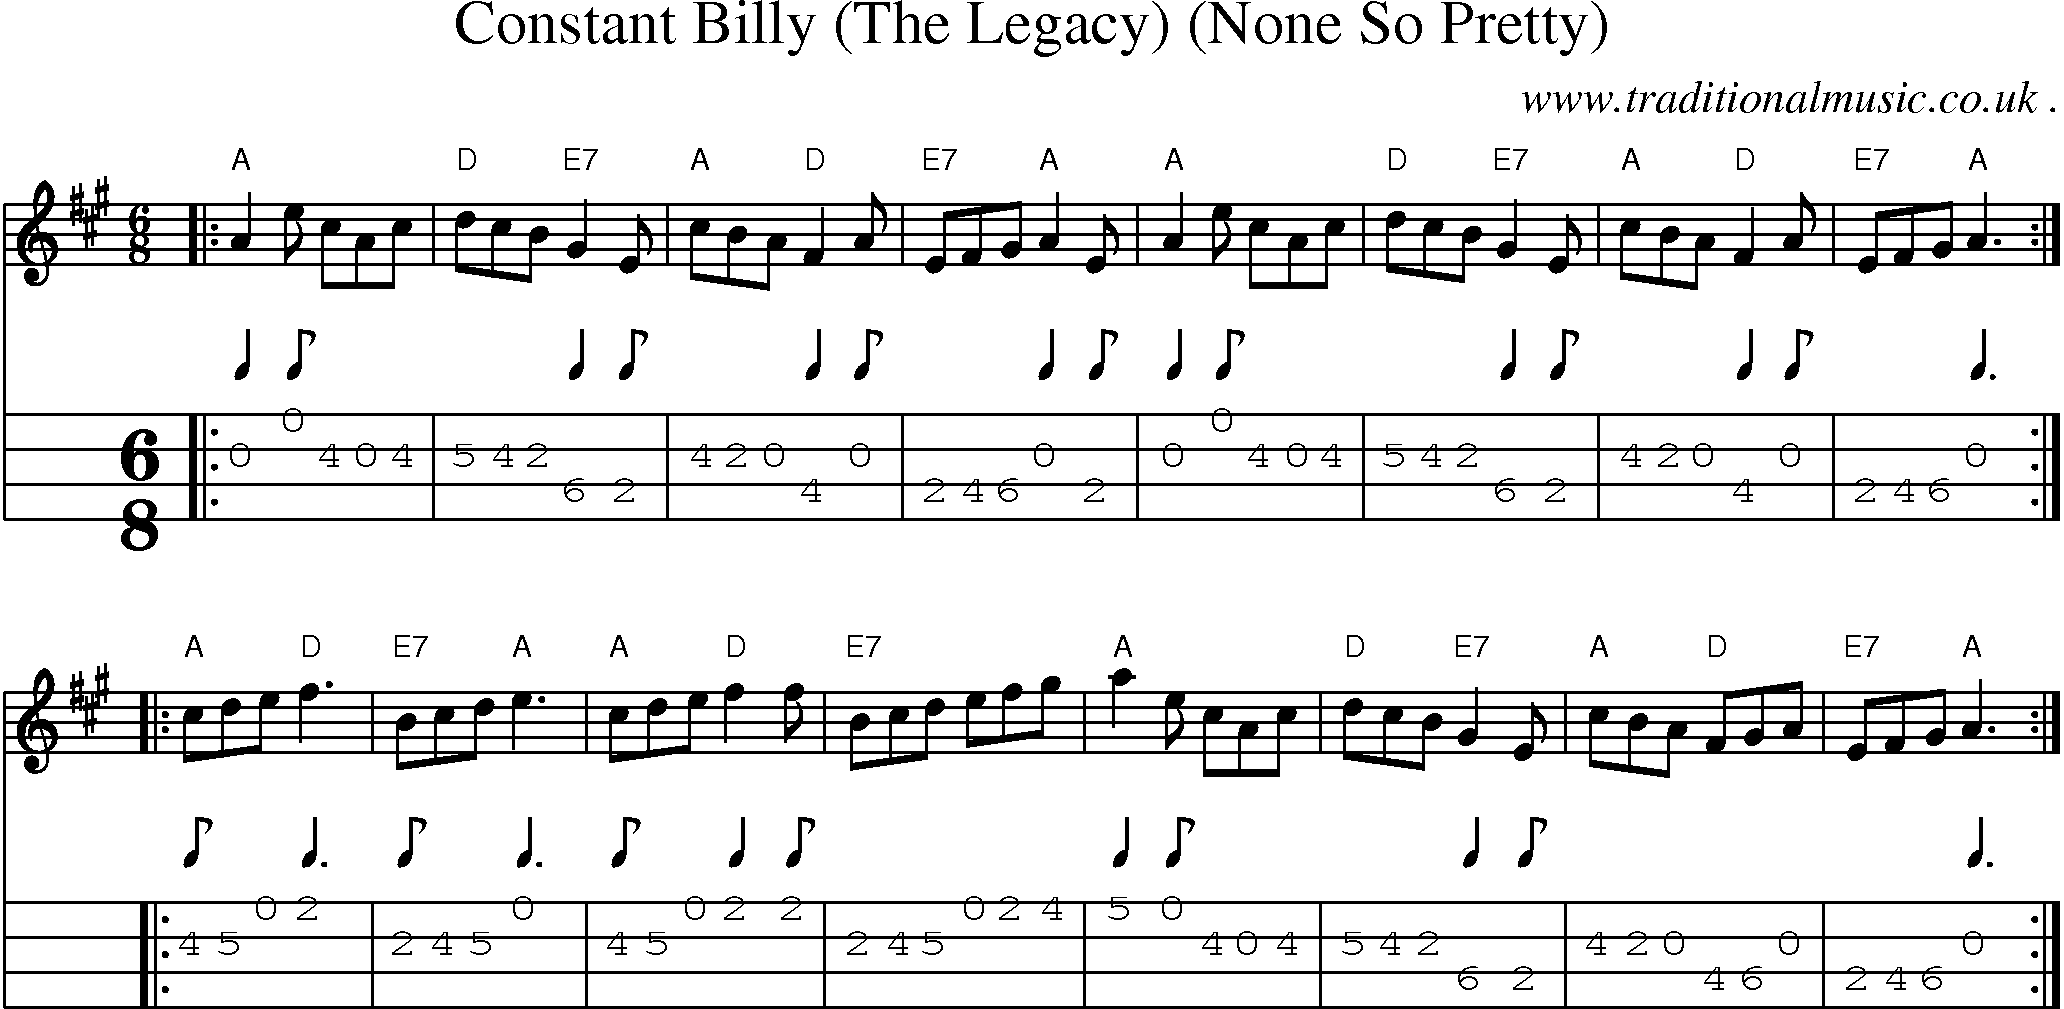 Sheet-music  score, Chords and Mandolin Tabs for Constant Billy The Legacy None So Pretty